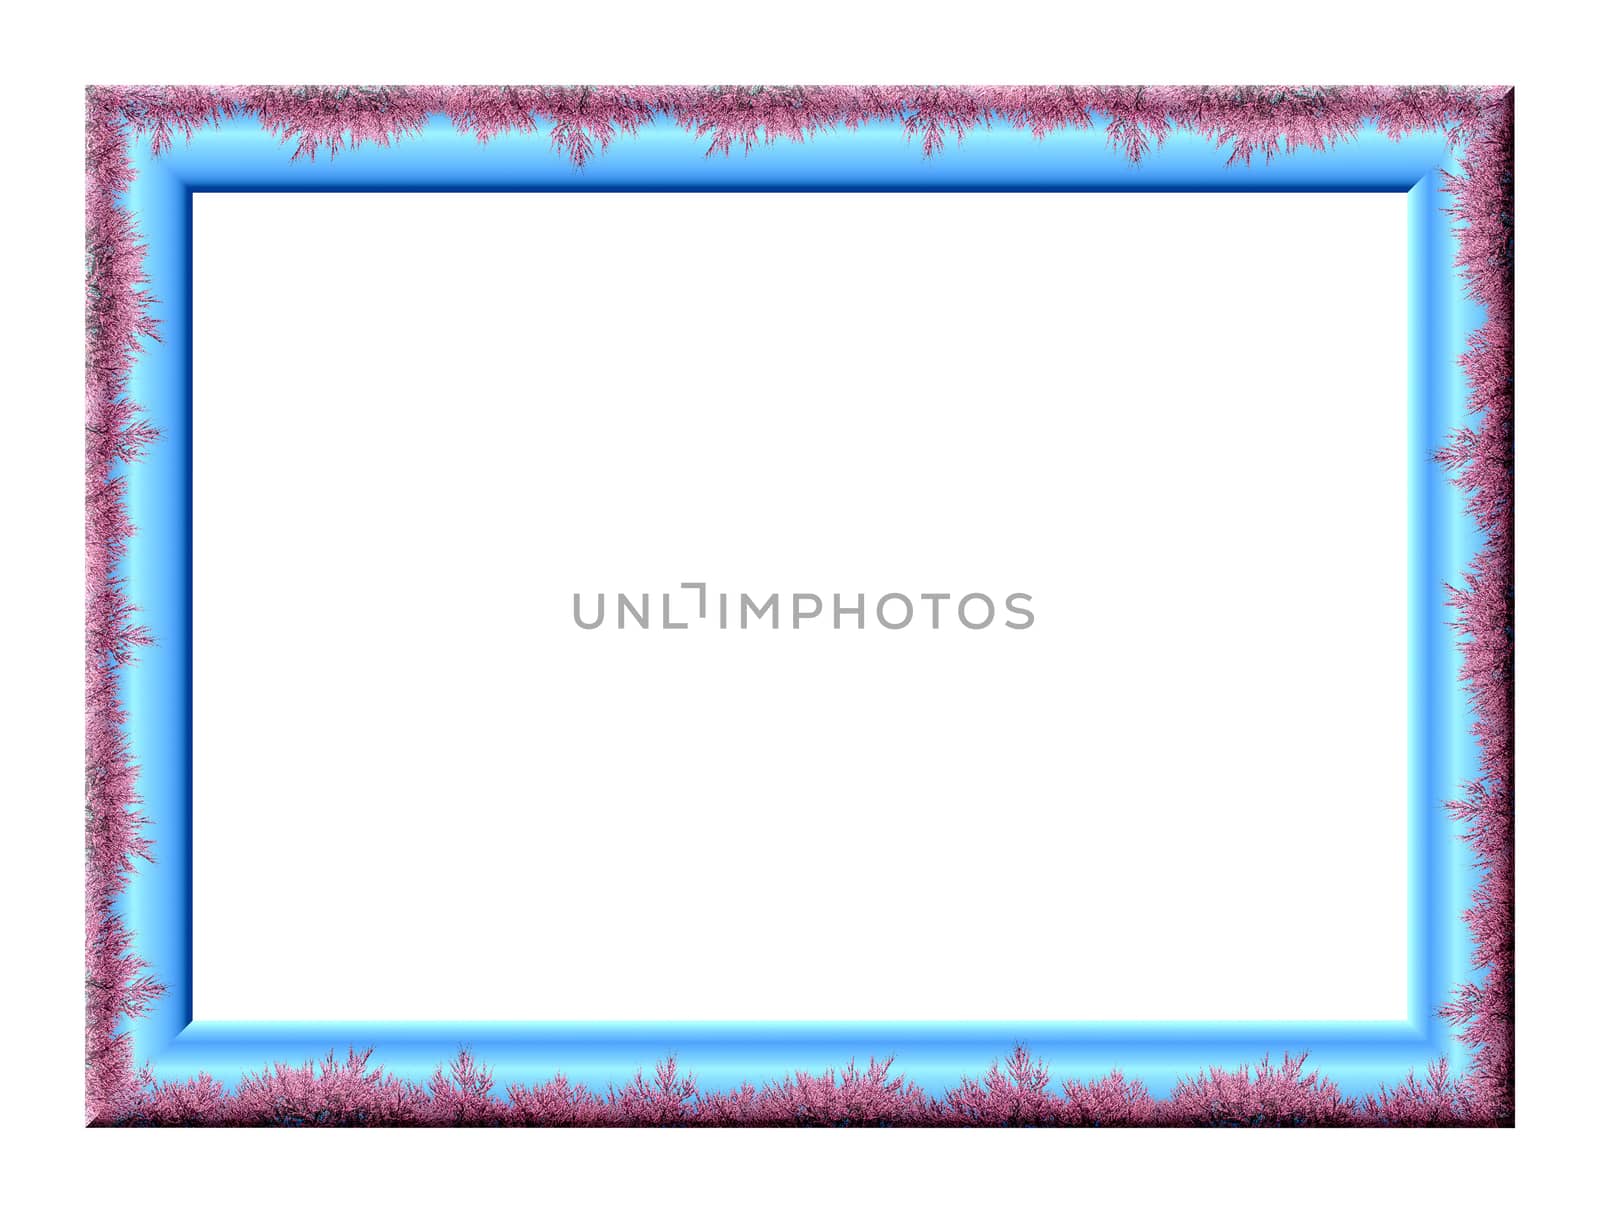 The rectangular blank embossed photo frame with a picture of plum blossoms on a blue background, isolated on a white background